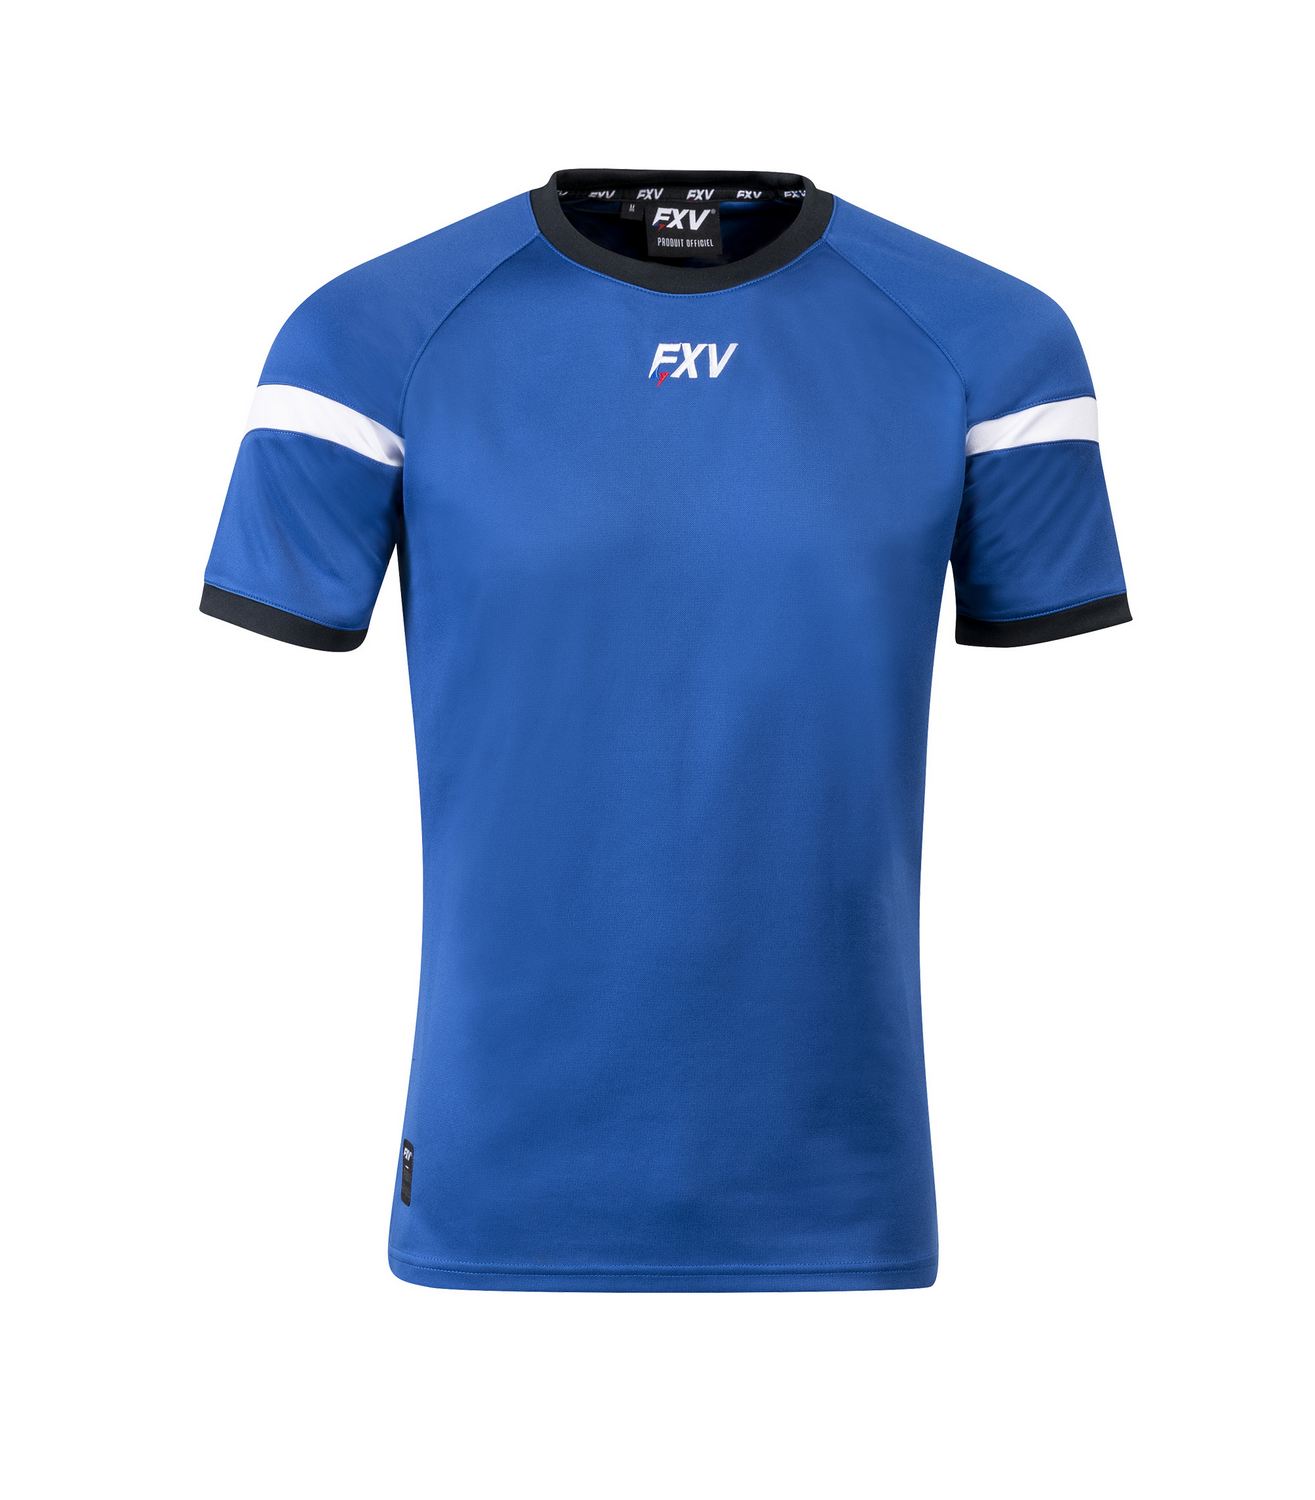 FORCE XV MAILLOT DE RUGBY TRAINING VICTOIRE JUNIOR Roy